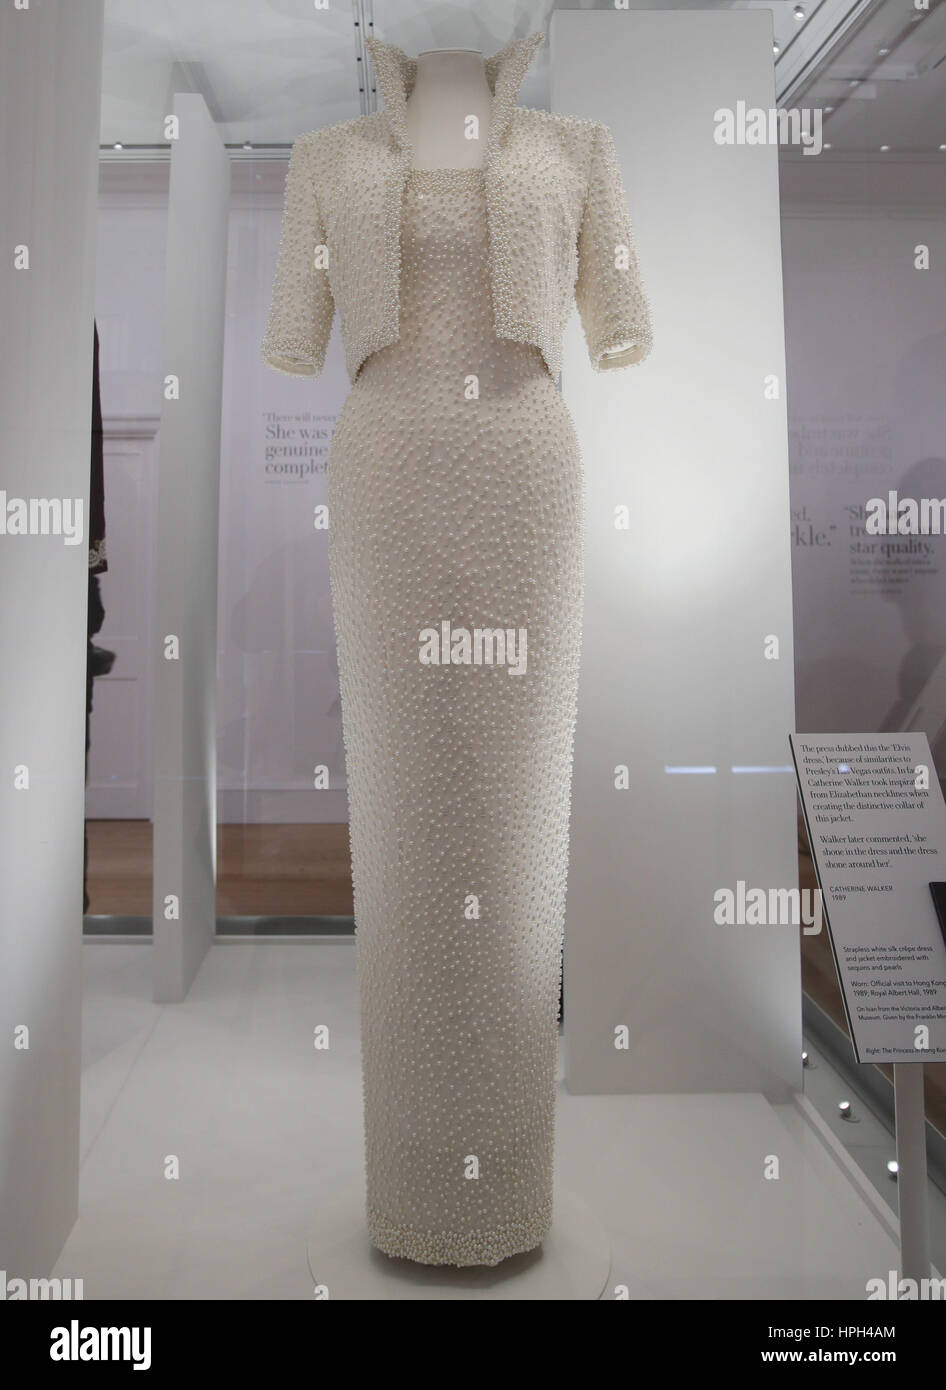 A strapless white silk crepe dress and jacket, embroidered with sequins and pearls, designed by Catherine Walker and worn by the Princess of Wales in 1989, at the preview of Diana: Her Fashion Story exhibition at Kensington Palace in London, which celebrates the style of Diana, Princess of Wales. Stock Photo